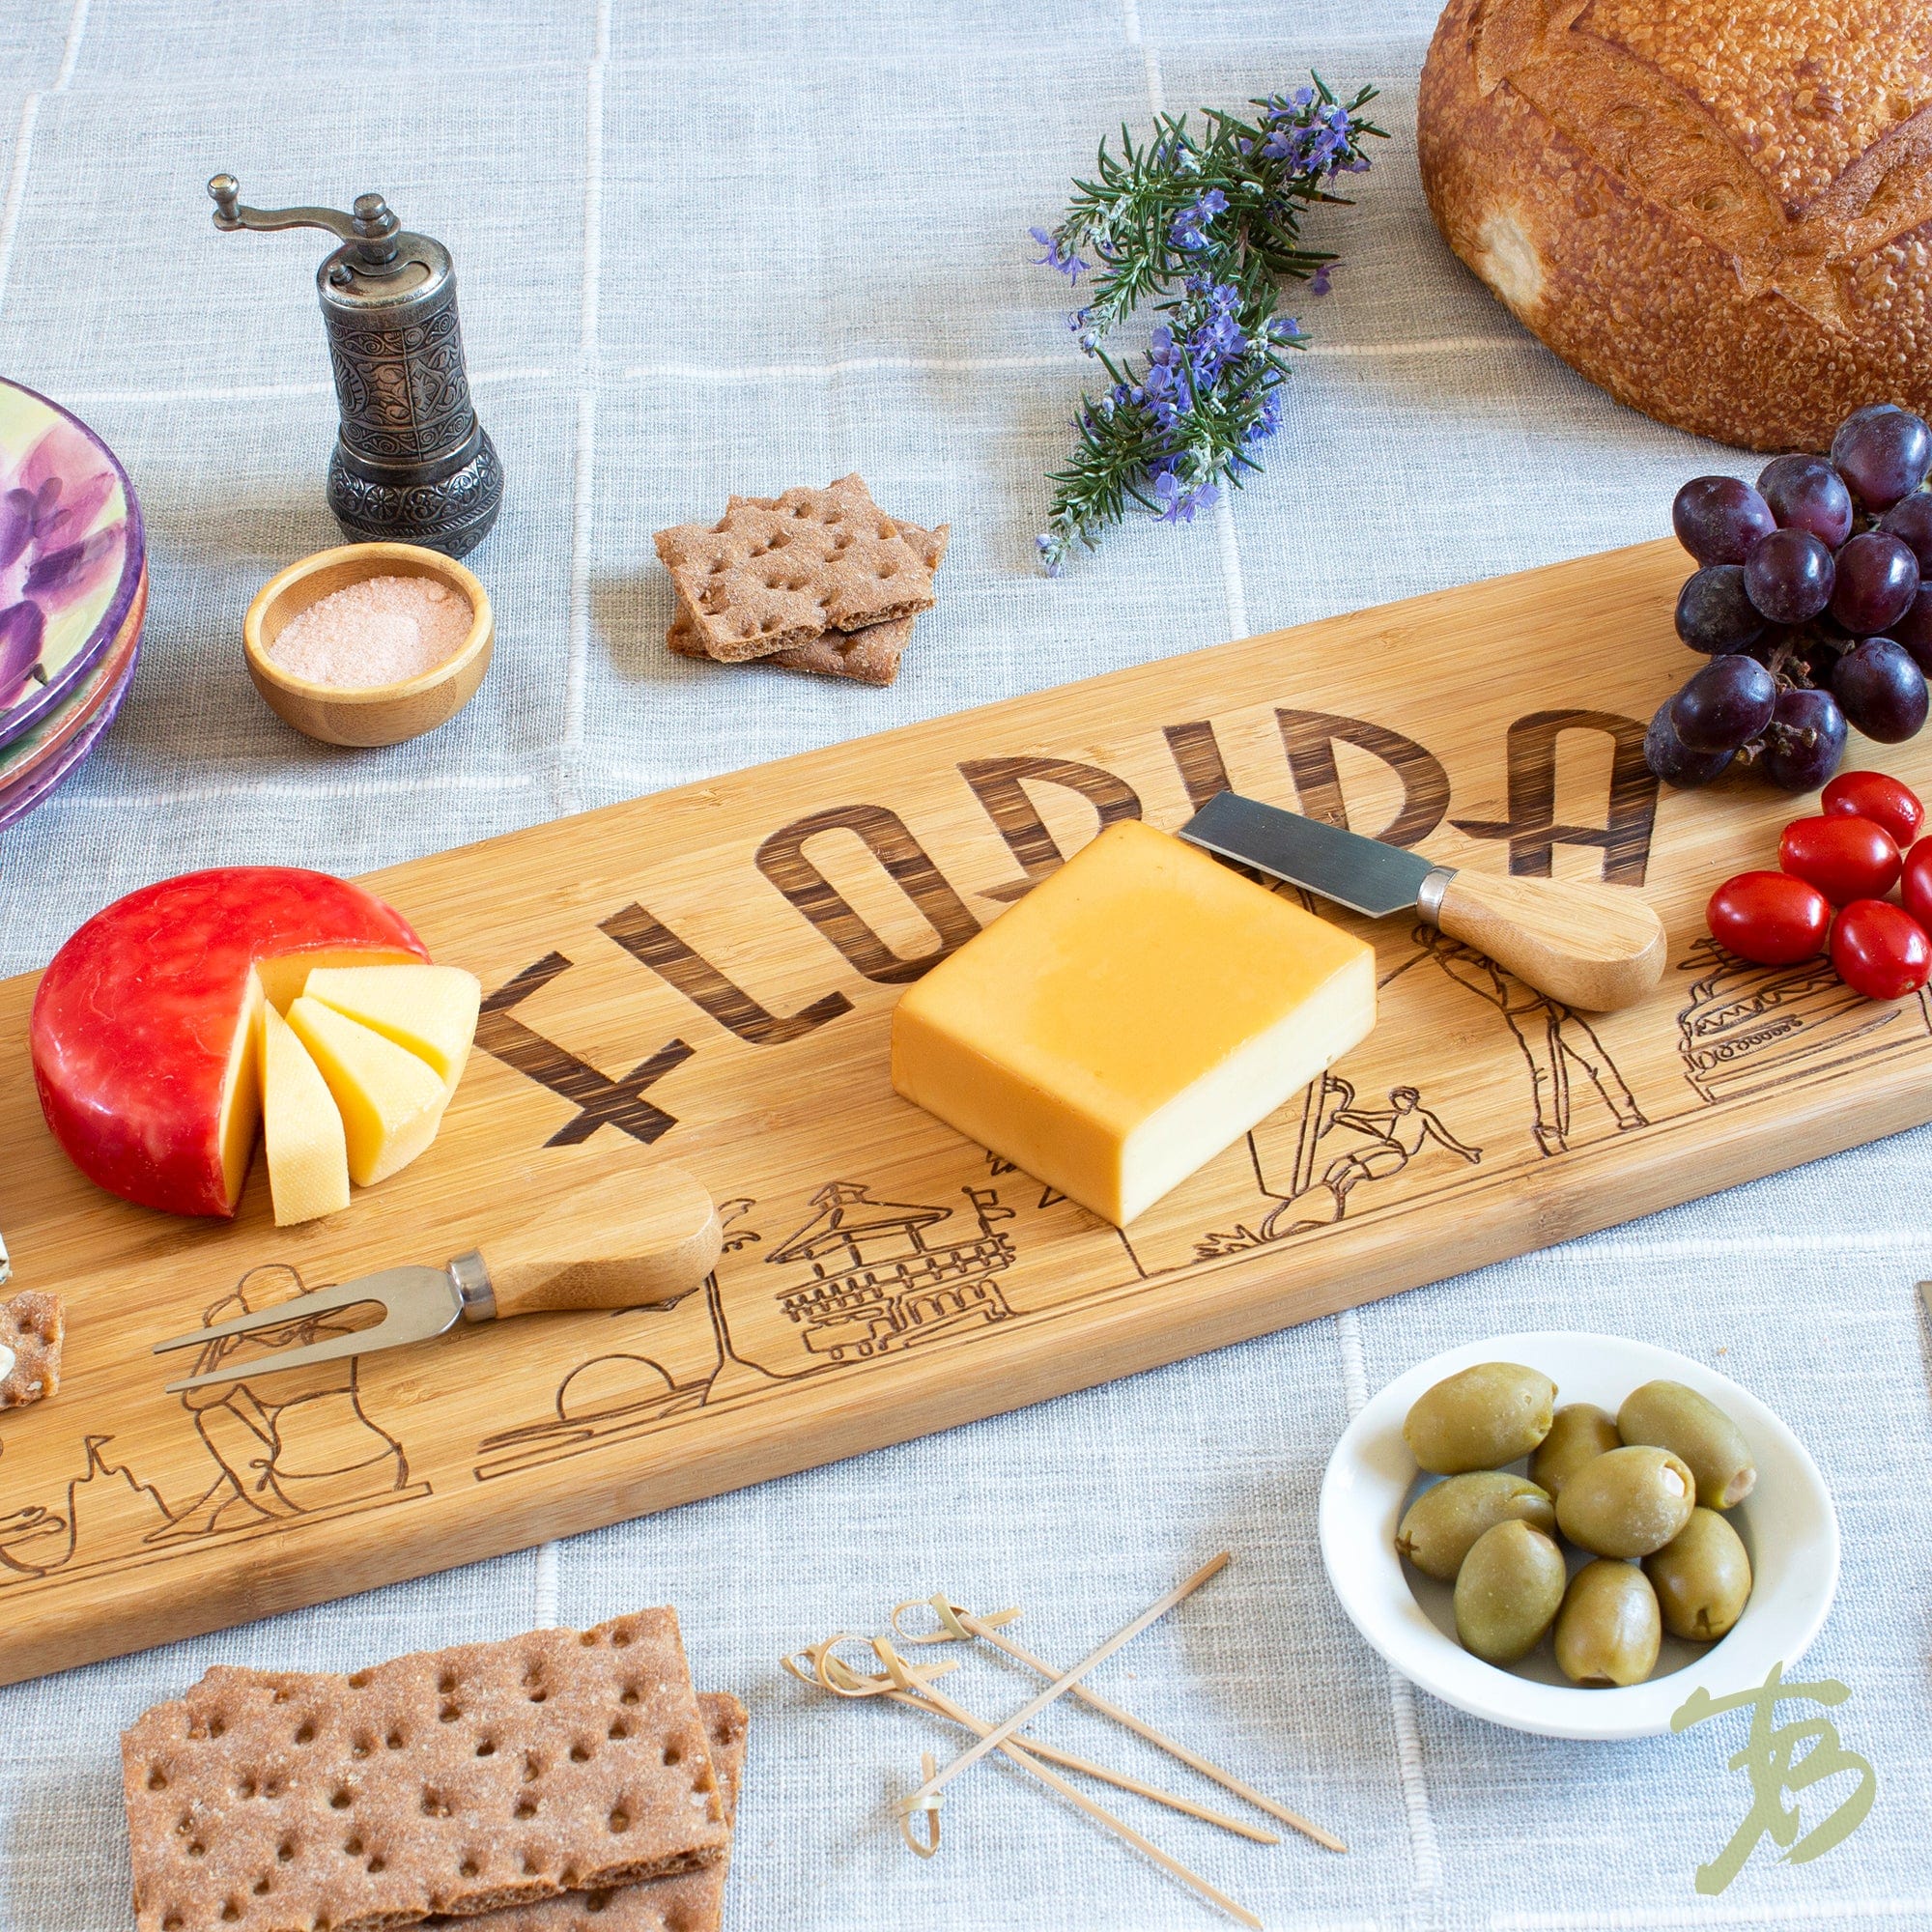 Totally Bamboo Florida Extra-Large Charcuterie Board